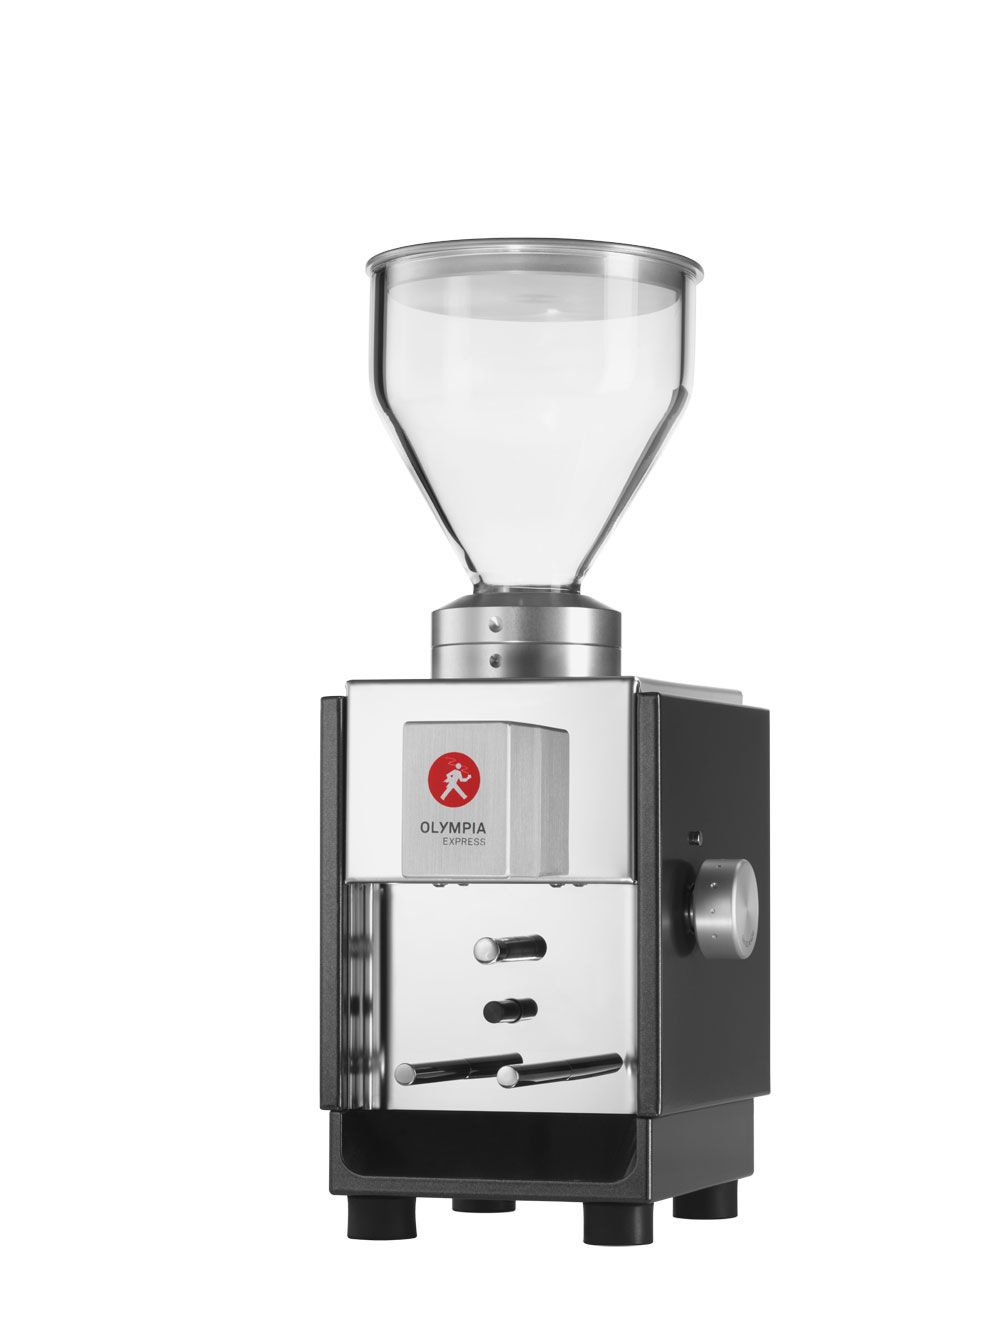 Olympia Express Moca White Coffee Grinder